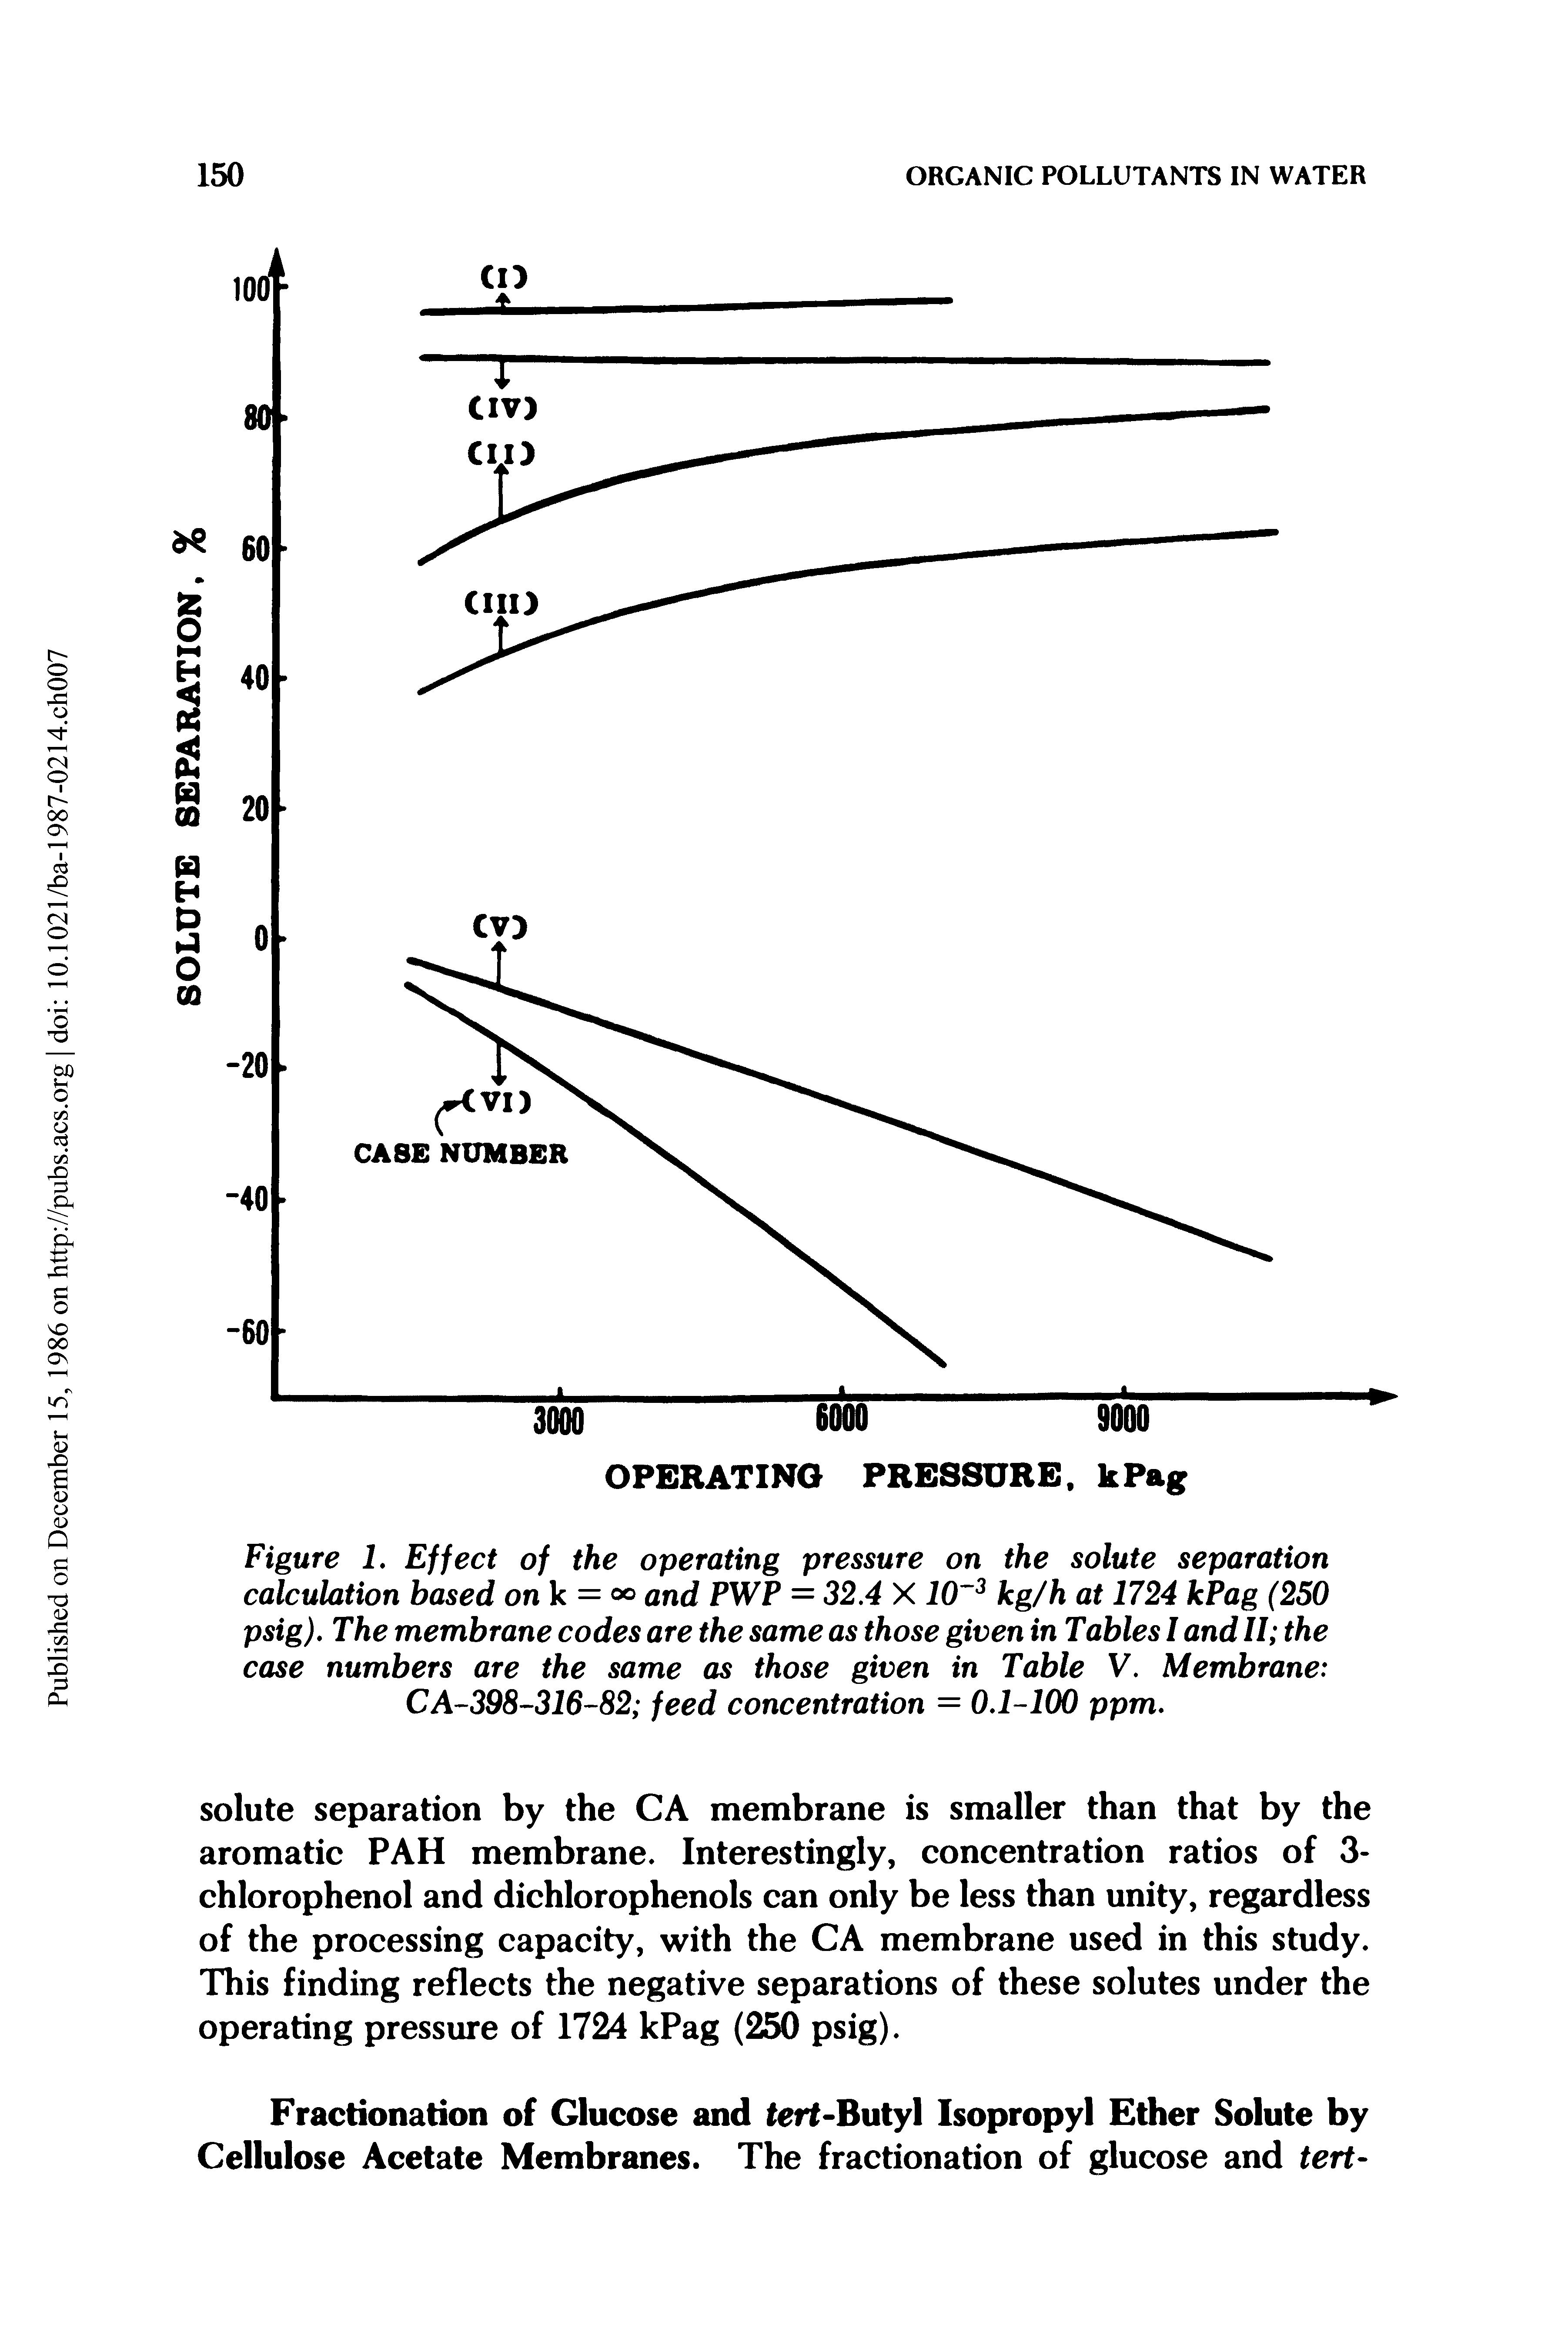 Figure 1. Effect of the operating pressure on the solute separation calculation based on k = and PWP = 32.4 X 10 3 kg/h at 1724 kPag (250 psig). The membrane codes are the same as those given in Tables I and II the case numbers are the same as those given in Table V. Membrane CA-398-316-82 feed concentration = 0.1-100 ppm.